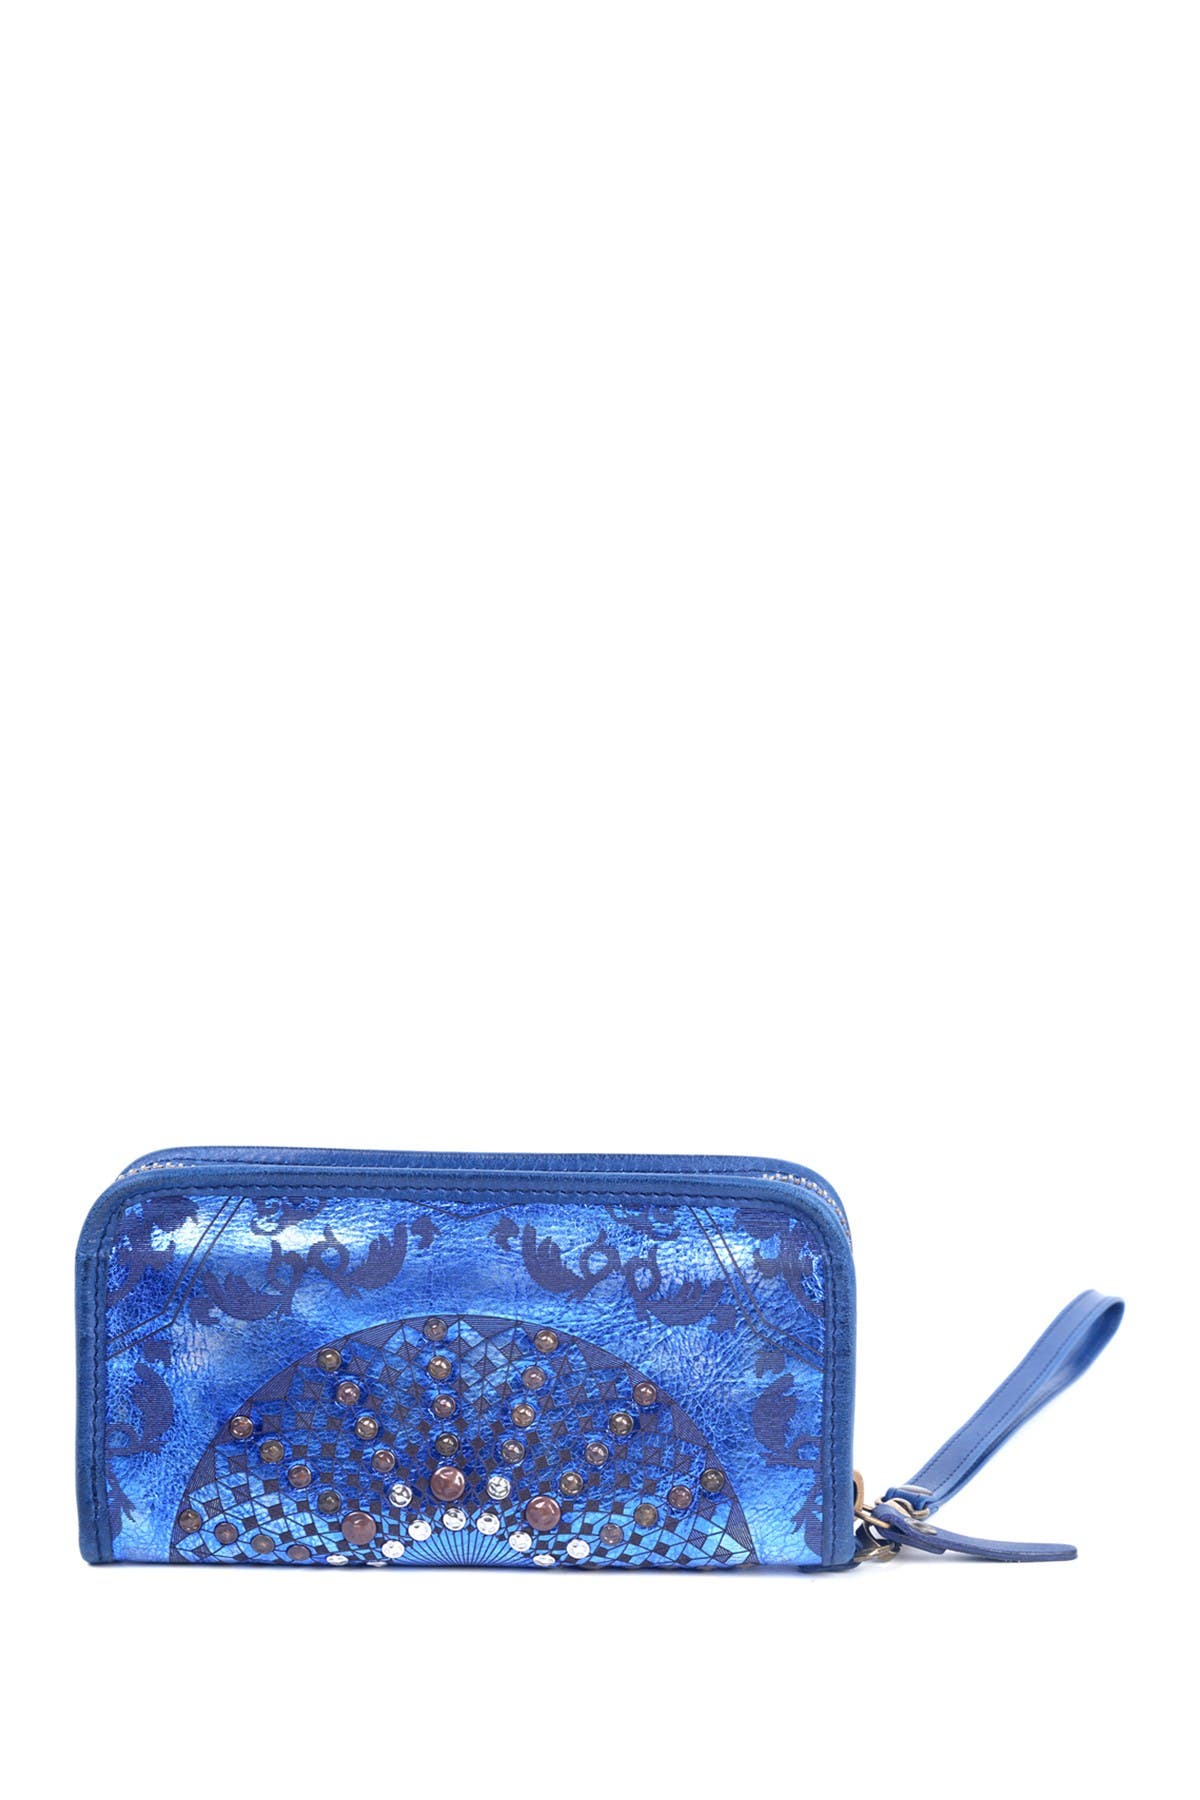 Old Trend Mola Leather Clutch In Medium Blue5